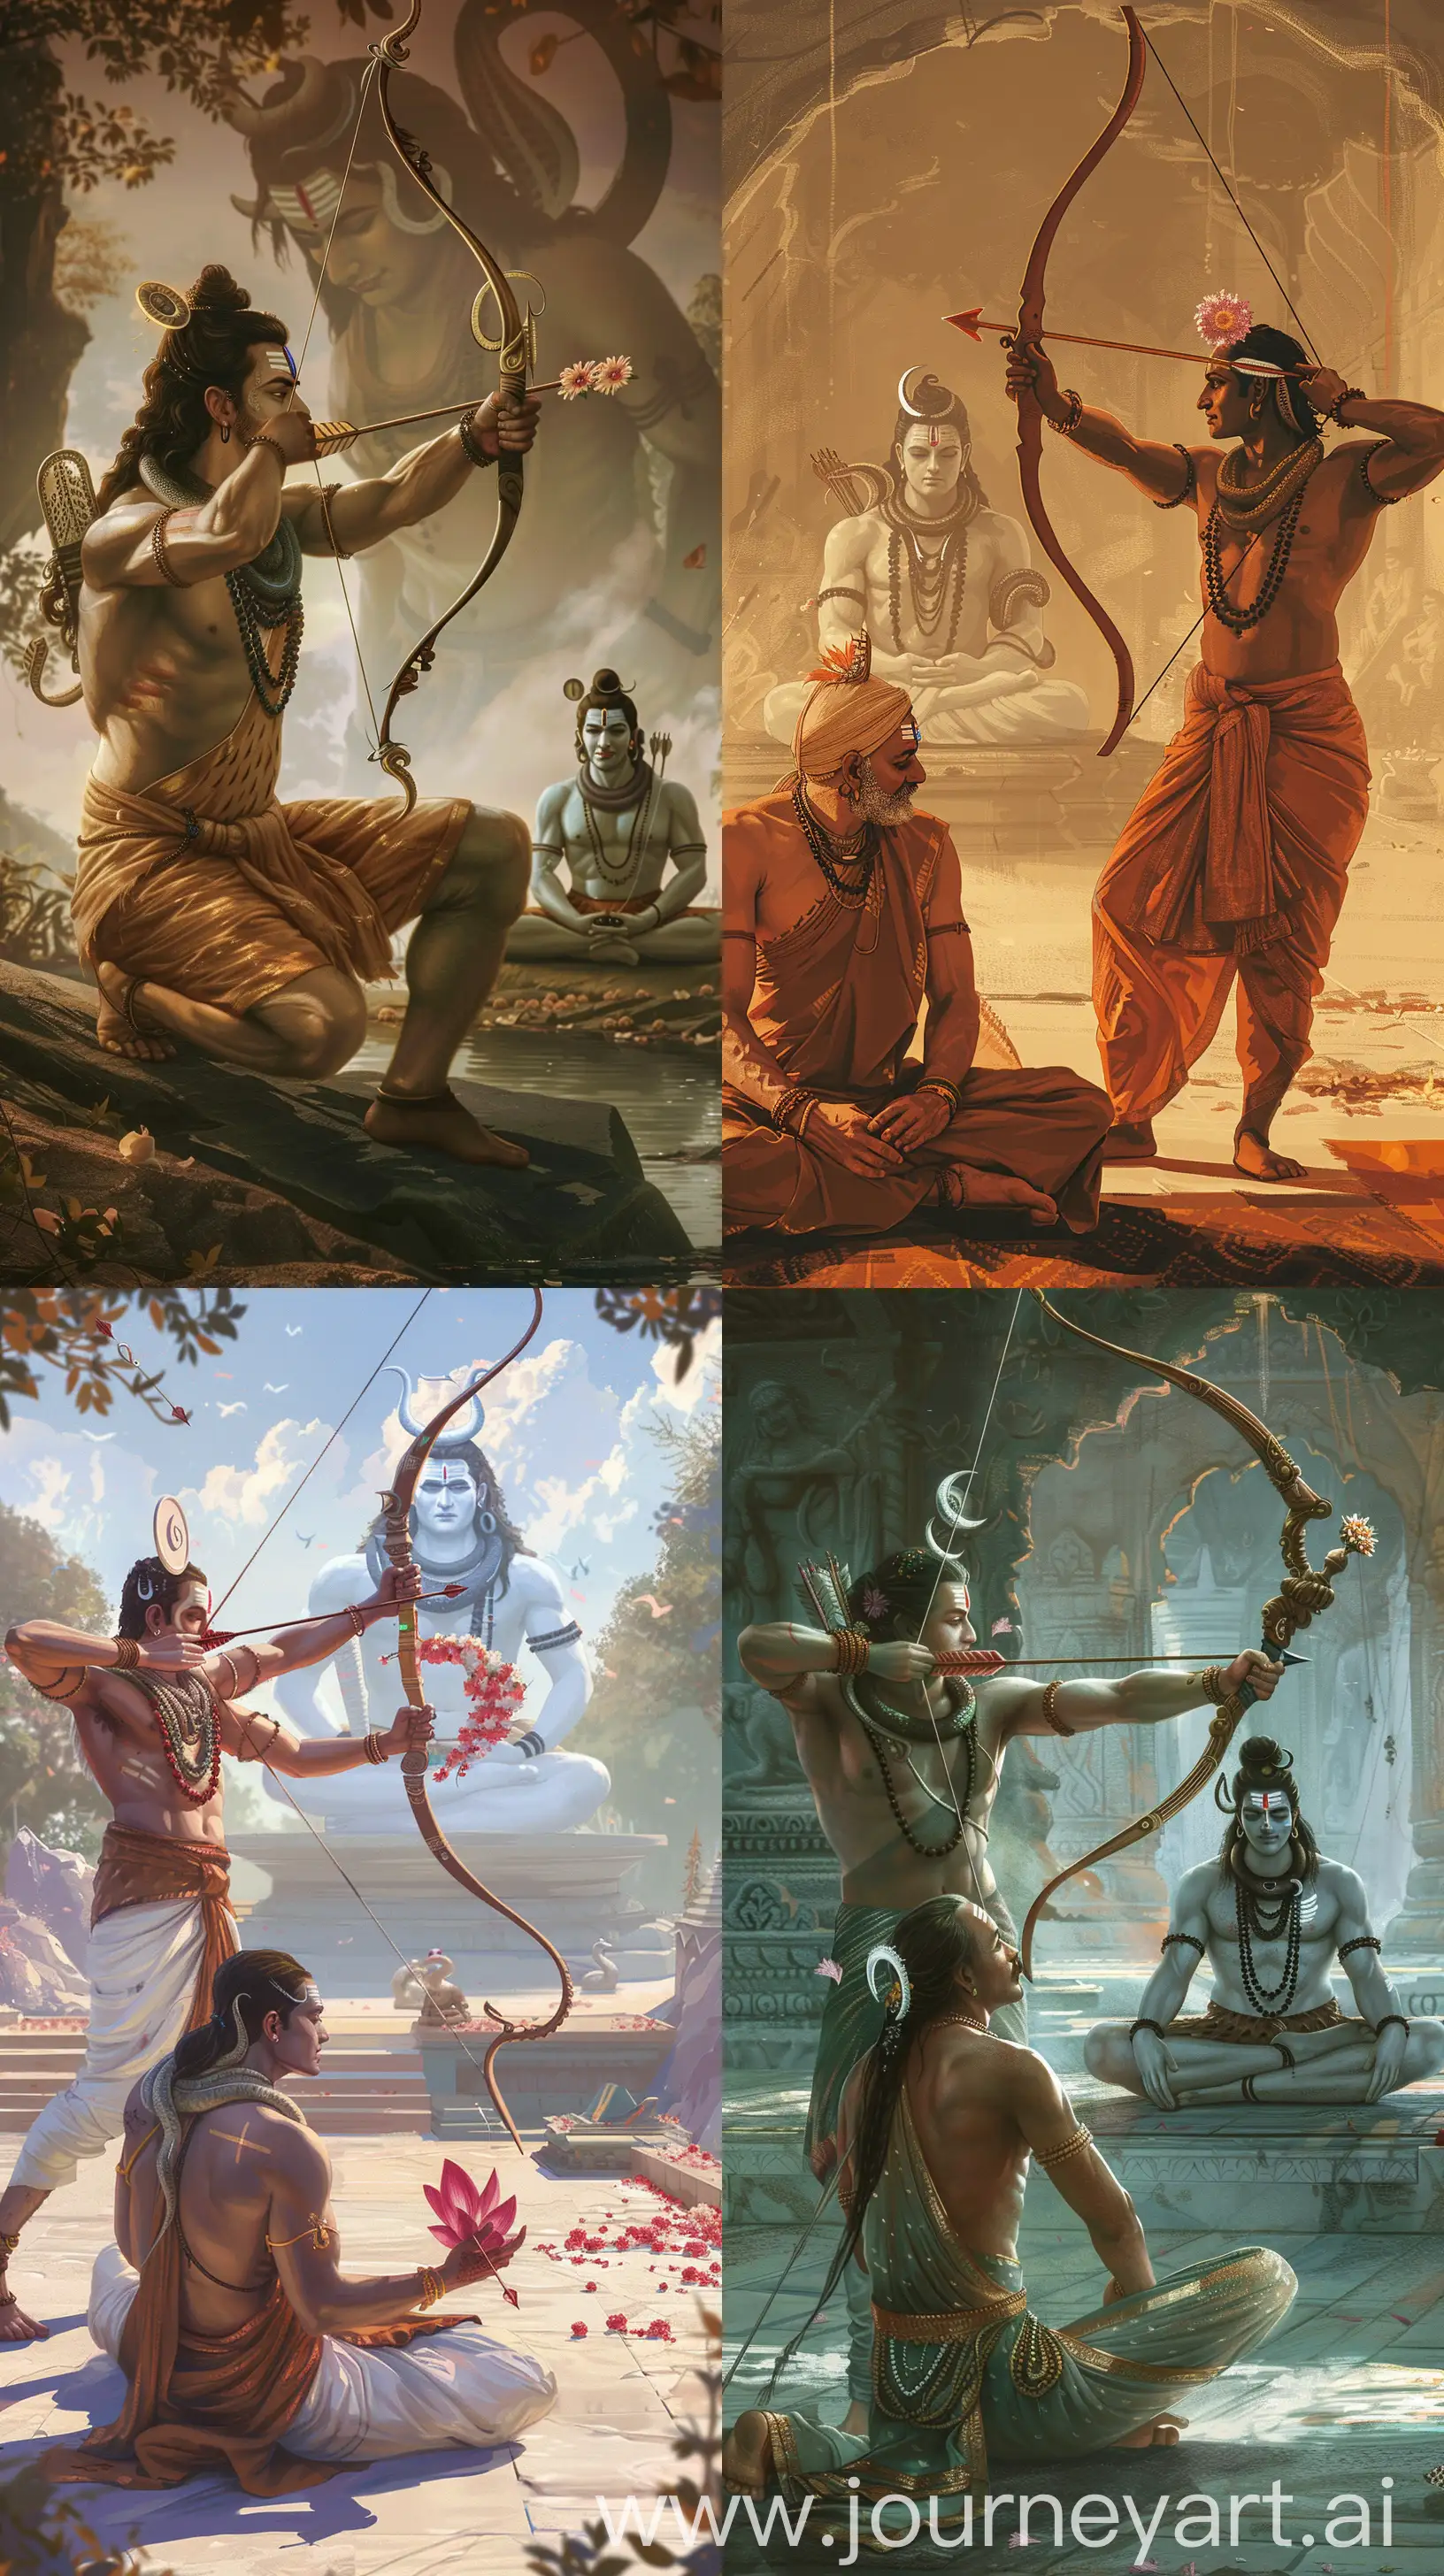 
Images depicting an Hindu deity in his thirties holding a bow and a flower arrow, aiming, Lord Shiva seated in a meditative pose infront, intricate details, 8k quality, serene and tranquil background --ar 9:16